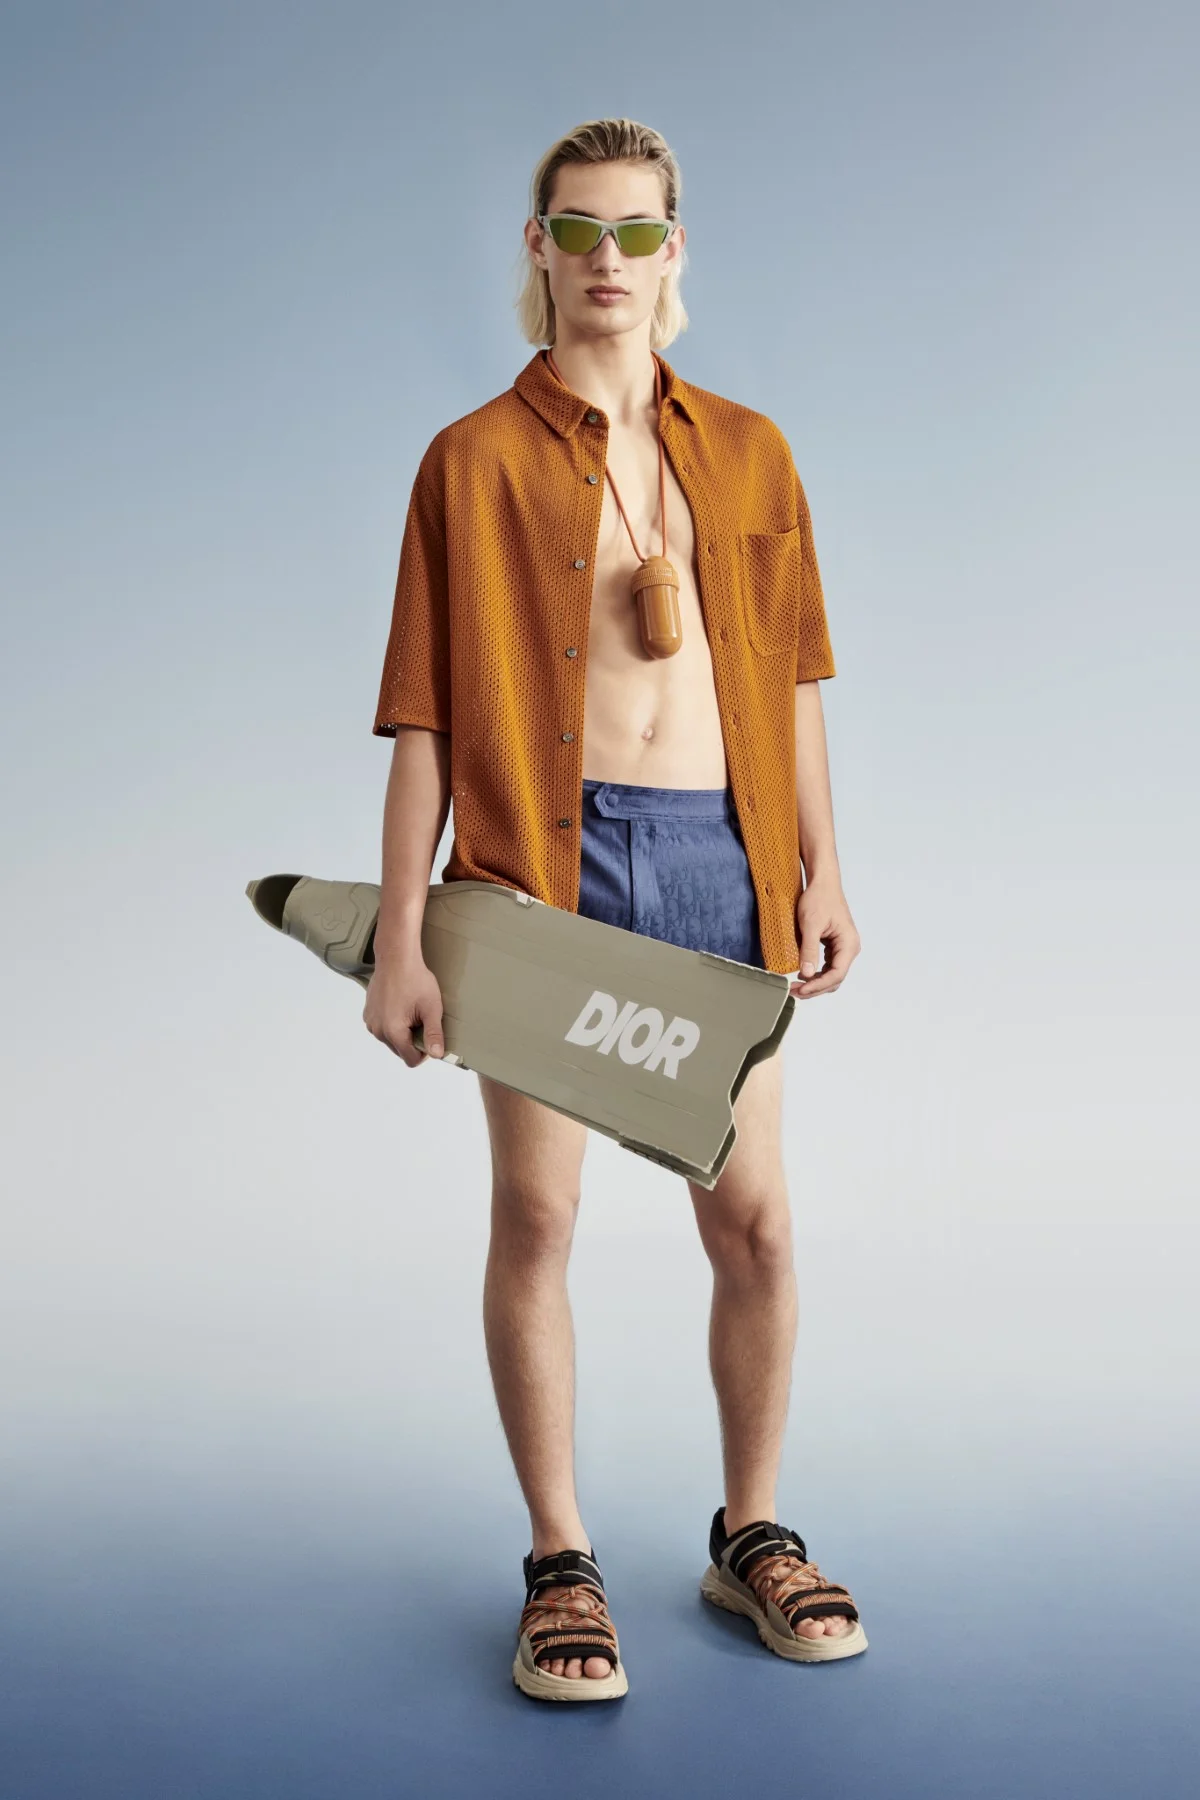 Dior Men and Parley for the Oceans join forces to unveil their eco-innovative beachwear capsule